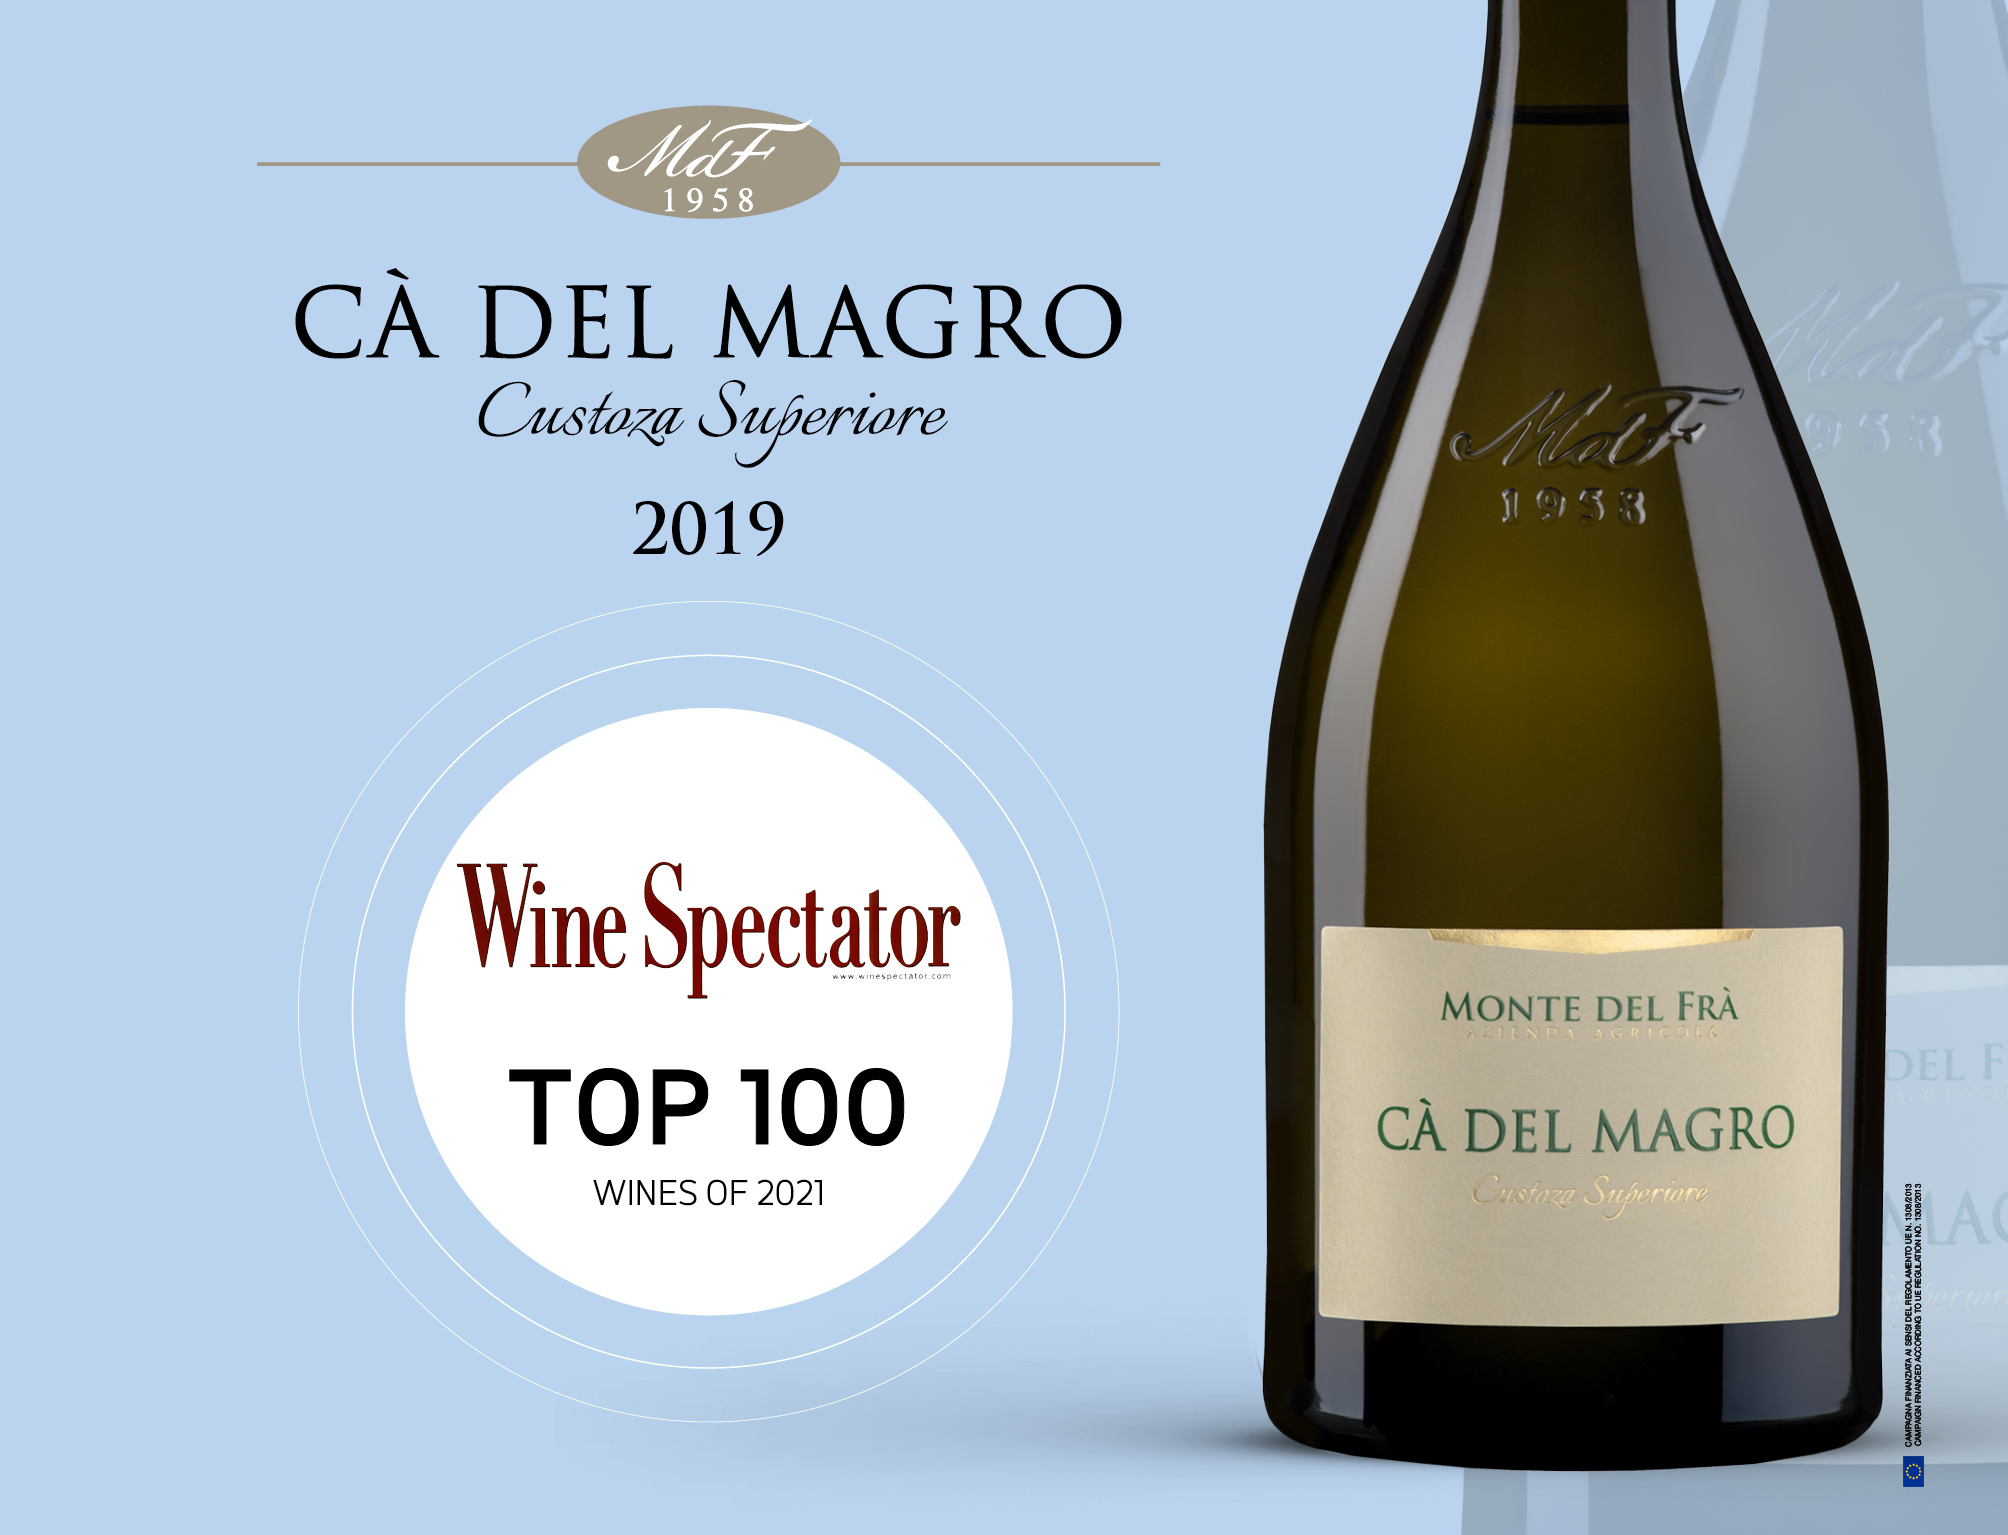 Custoza Superiore Cà del Magro 2019 among the top 100 wines 2021 by Wine Spectator guide.